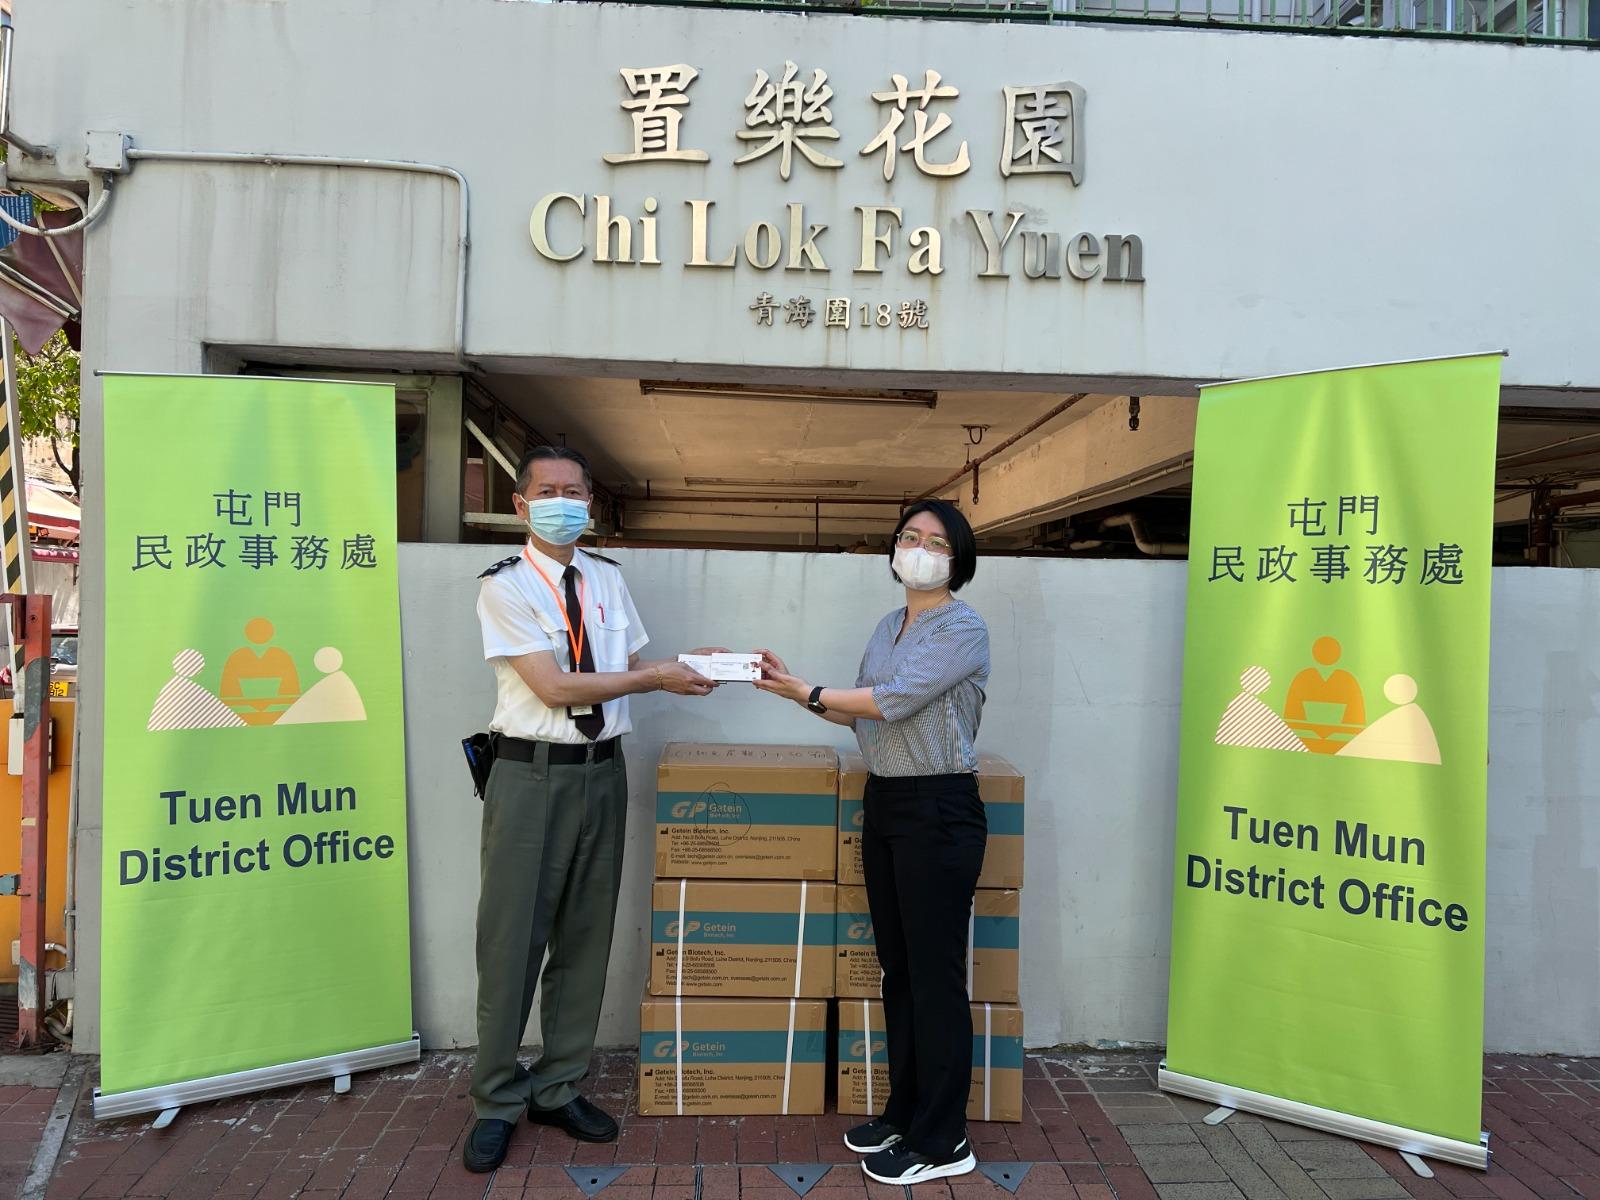 The Tuen Mun District Office today (June 26) distributed COVID-19 rapid test kits to households, cleansing workers and property management staff living and working in Chi Lok Fa Yuen for voluntary testing through the property management company.
